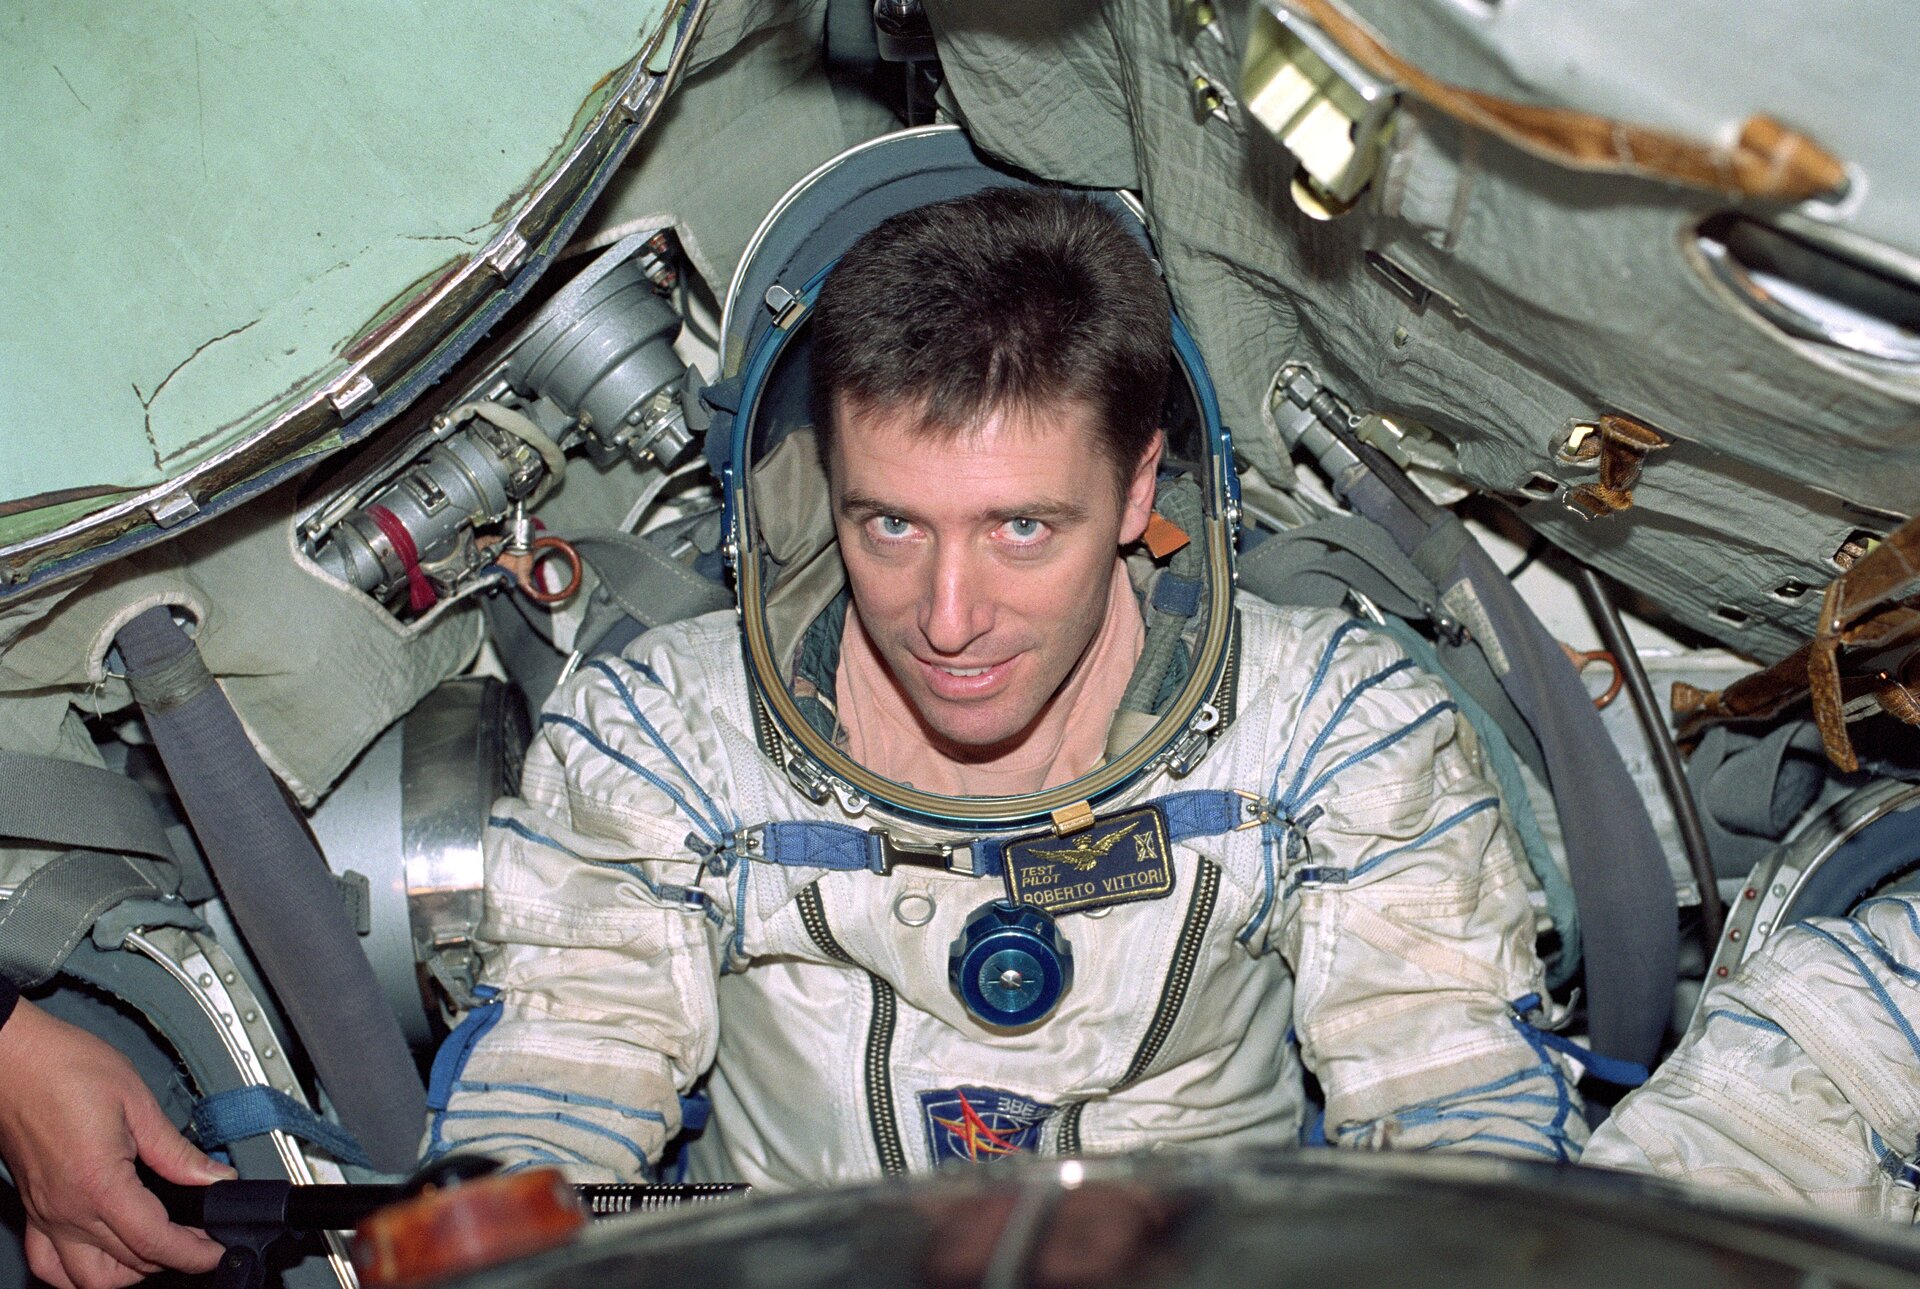 Roberto Vittori will fly to the ISS on 25 April